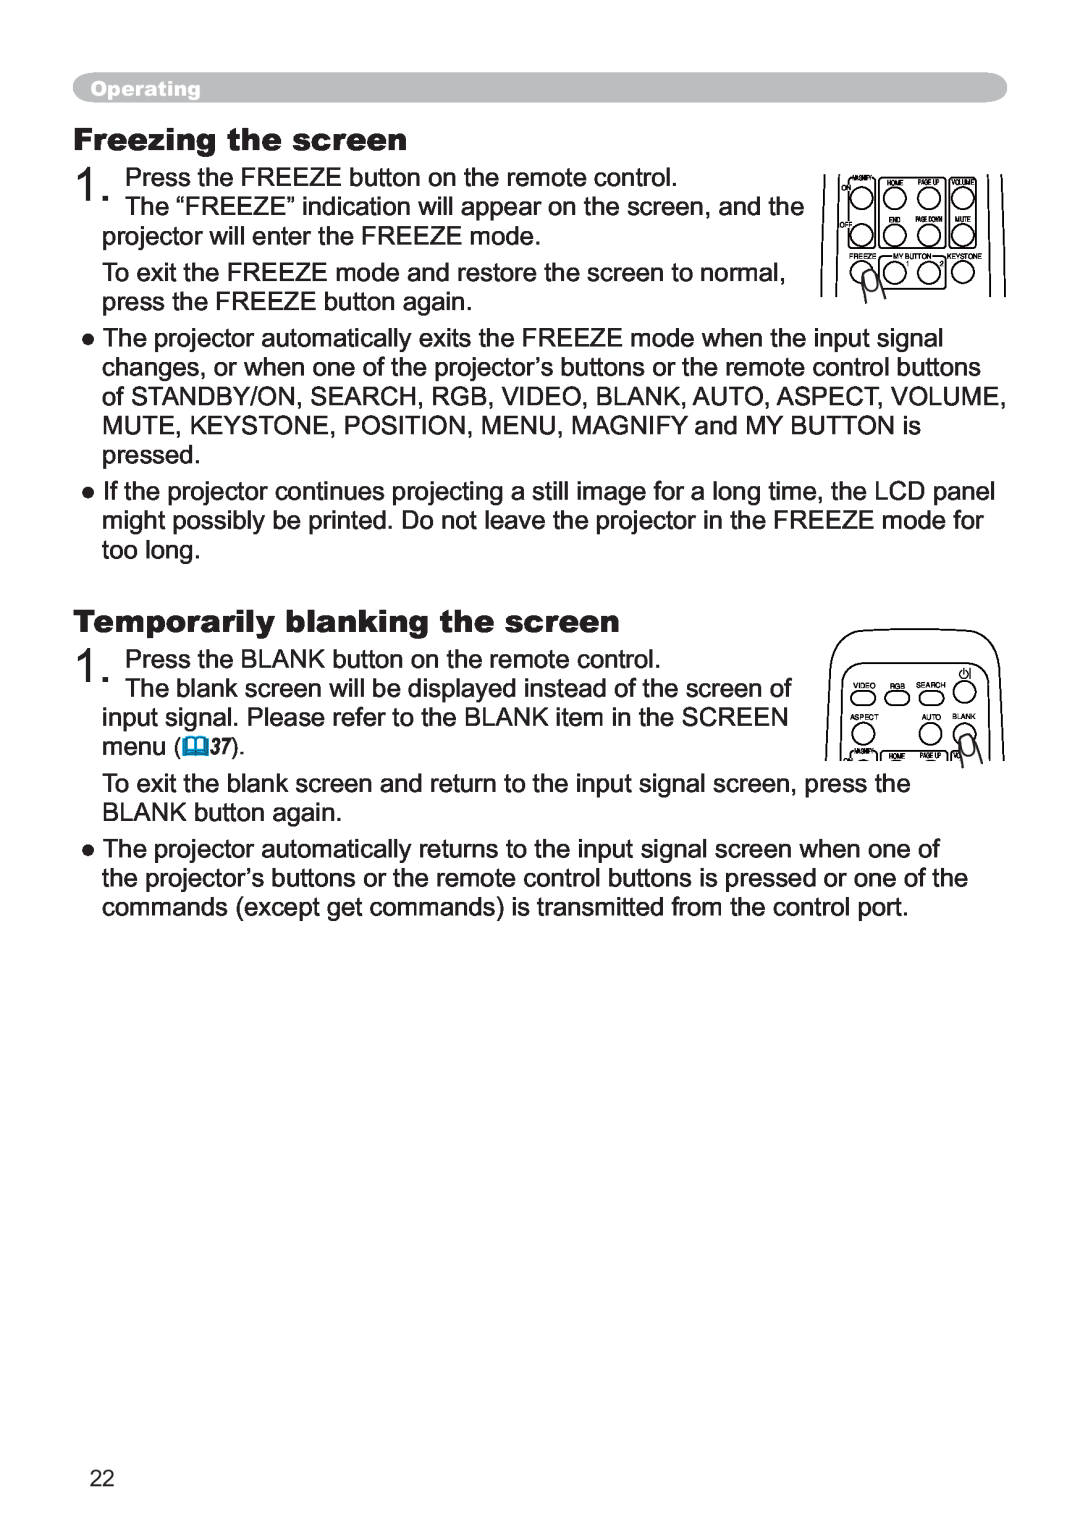 Hitachi ED-X12 user manual Freezing the screen, Temporarily blanking the screen 